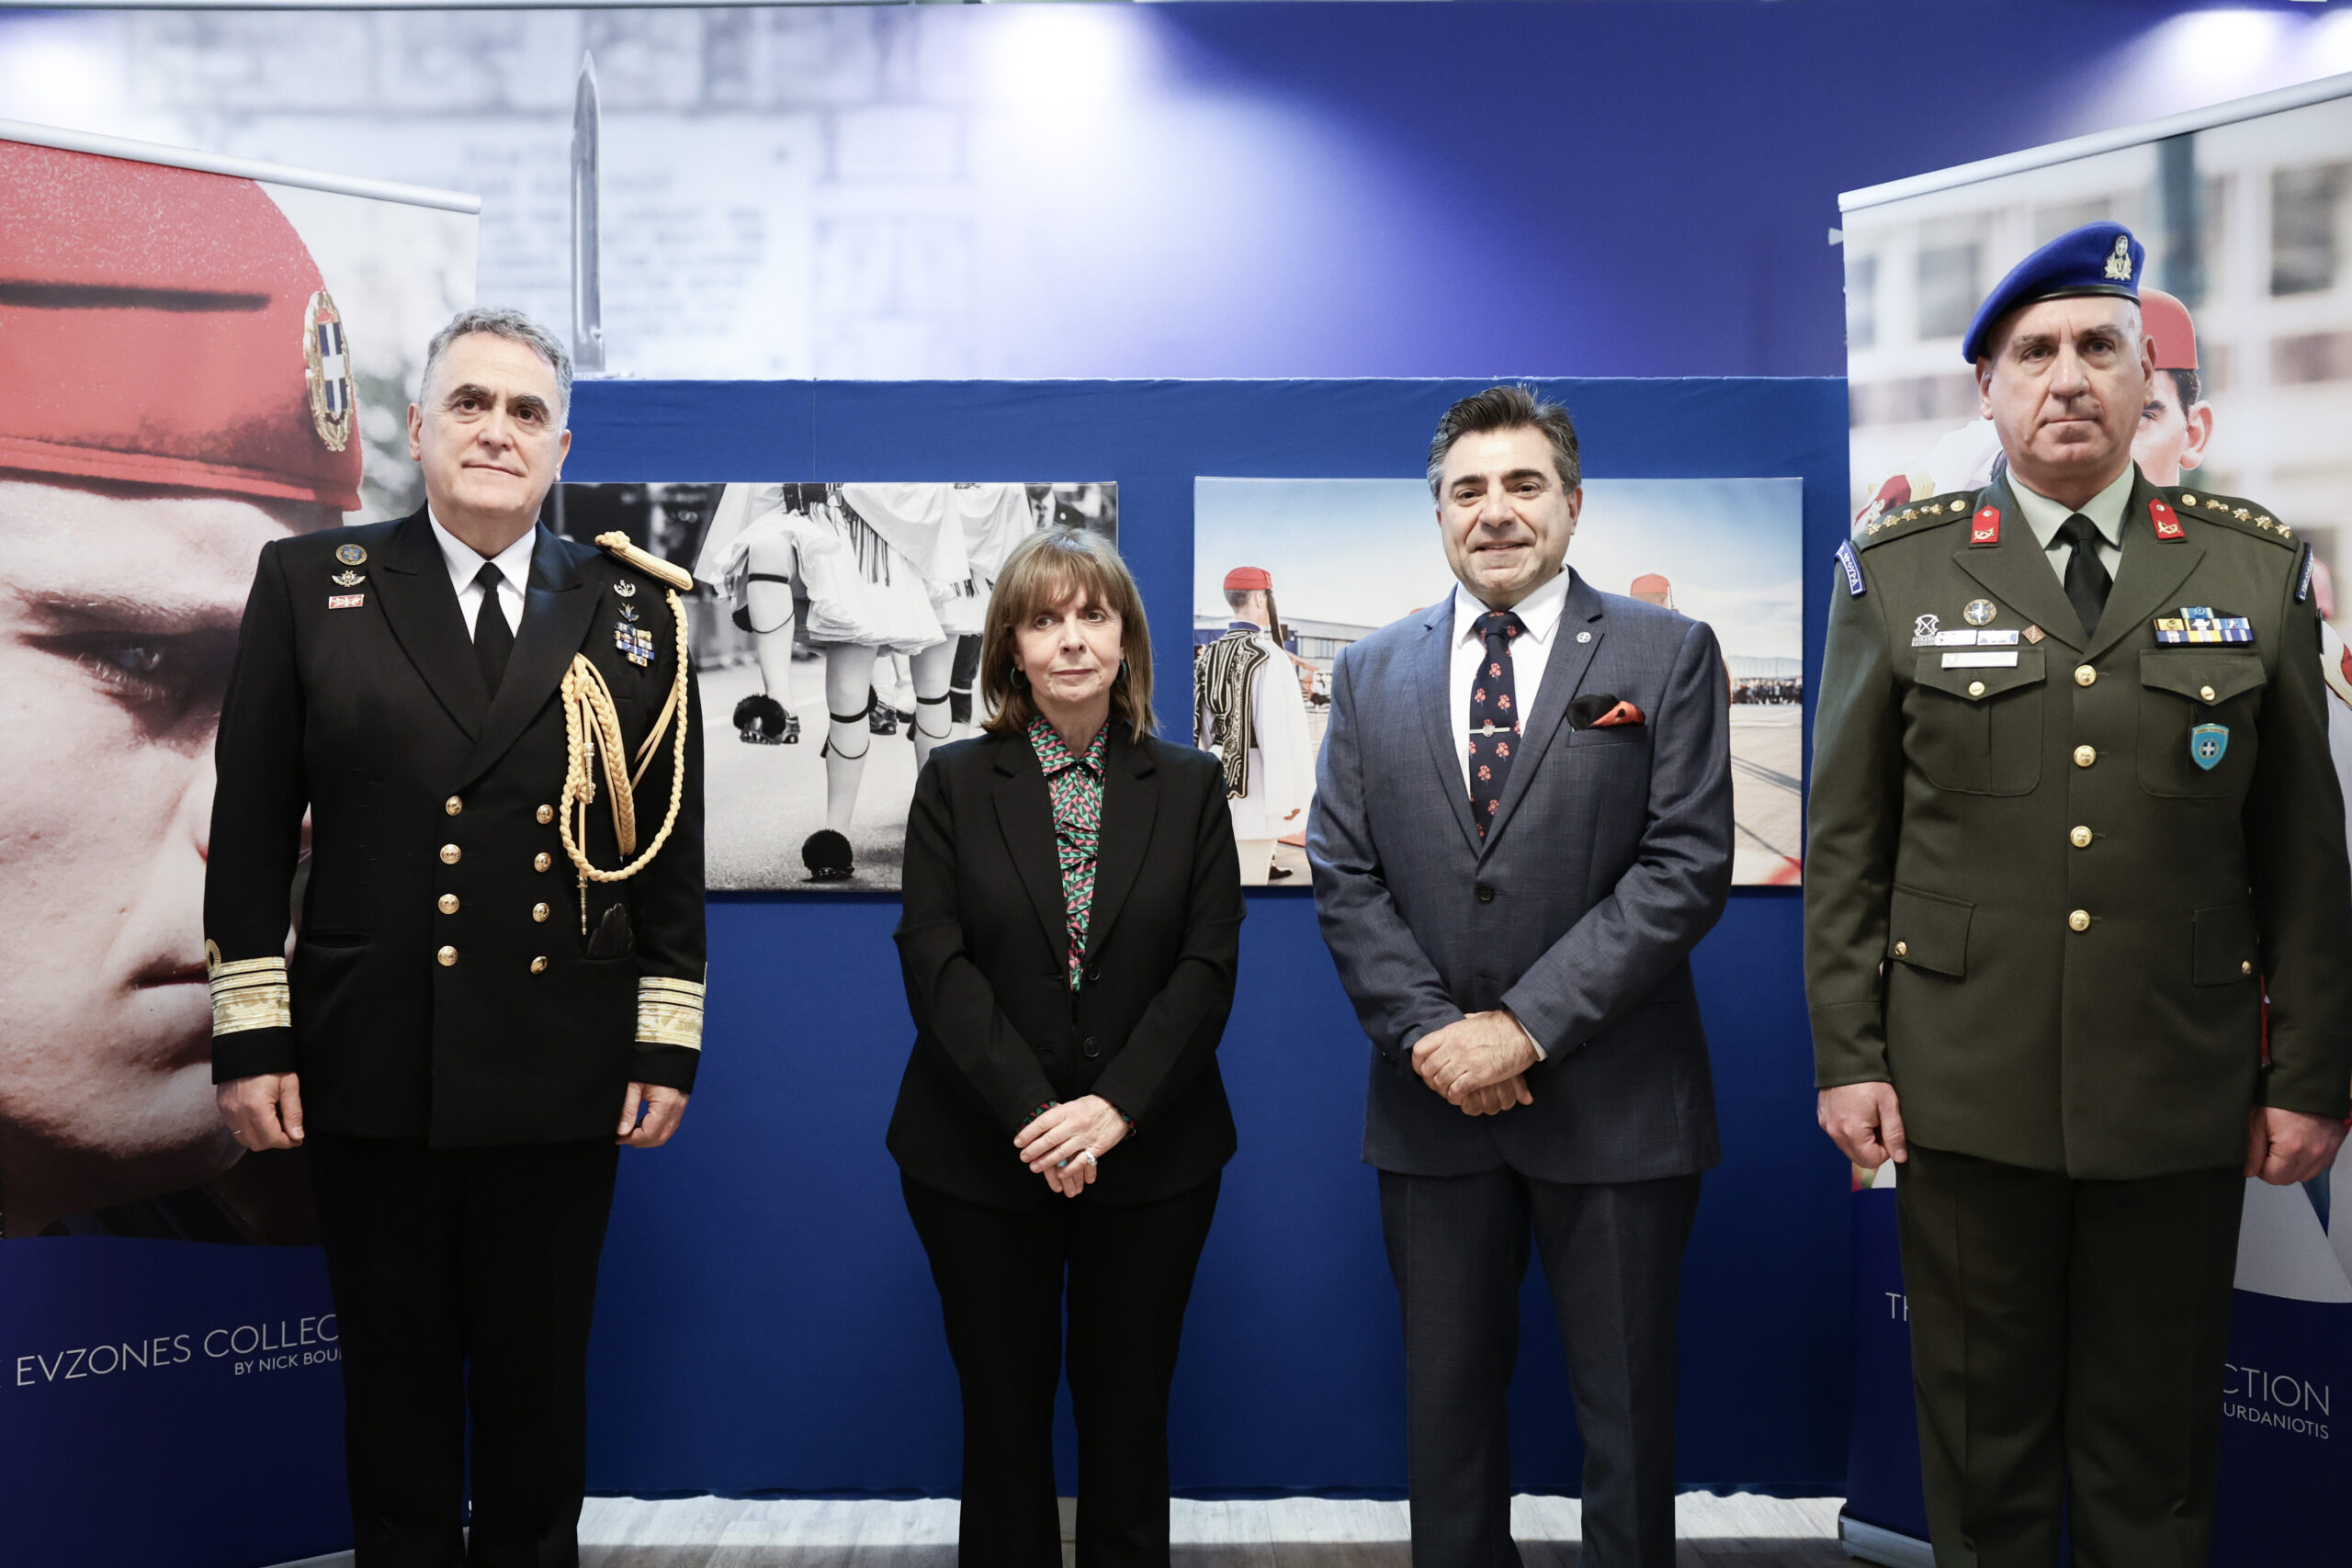 Preservation of Evzone Heritage:  Photographic Exhibition Presented to the President of Greece on a Momentous Occasion, The Presidency